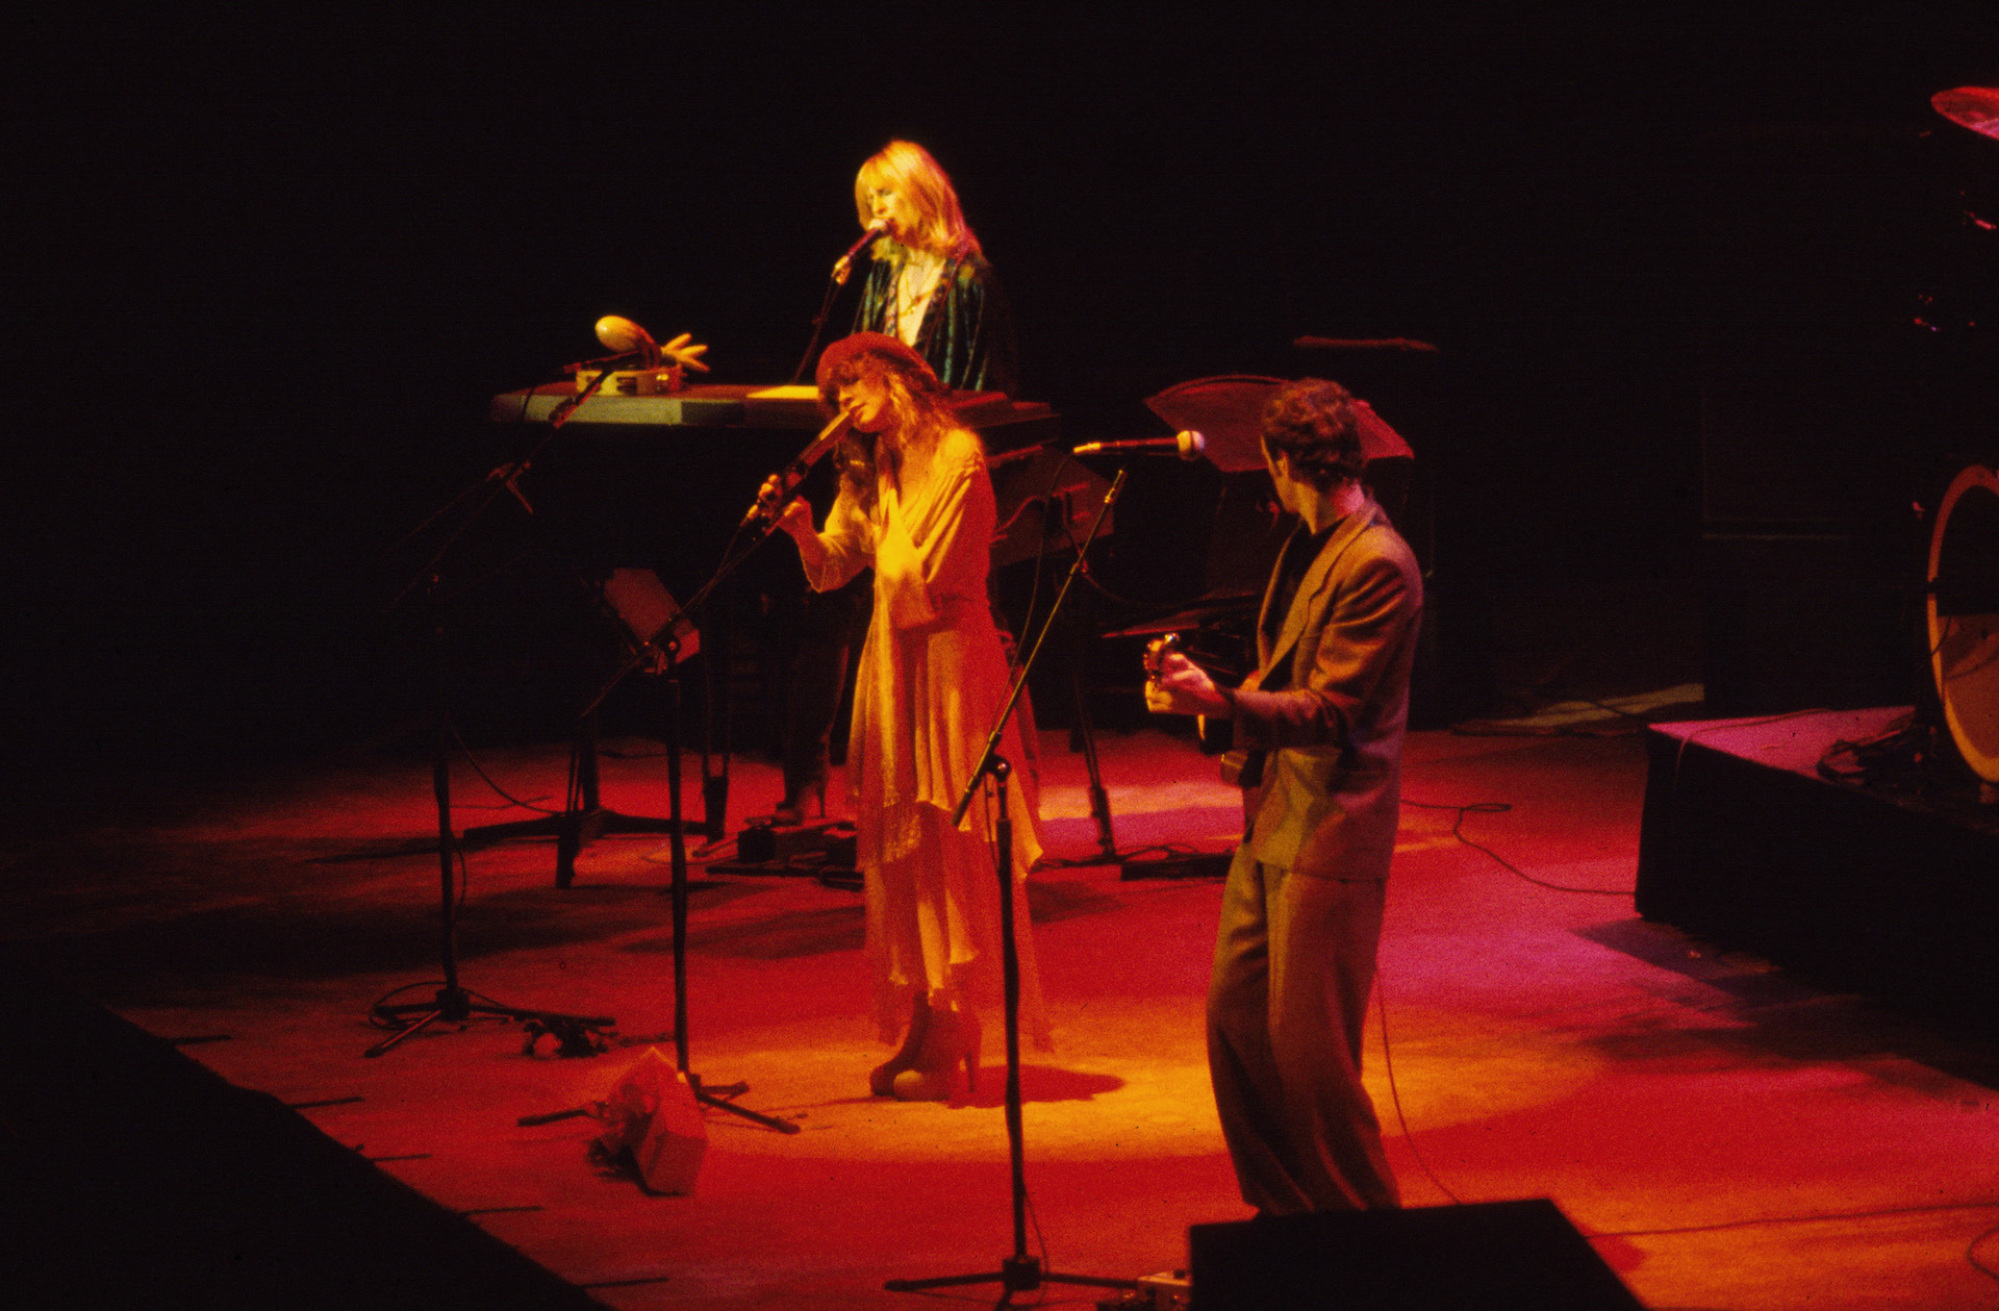 Christine McVie (top), on keyboards, vocalist Stevie Nicks (center), and Lindsey Buckingham, on guitar, all of the group Fleetwood Mac, perform onstage at Madison Square Garden, New York, New York, November 15, 1978.